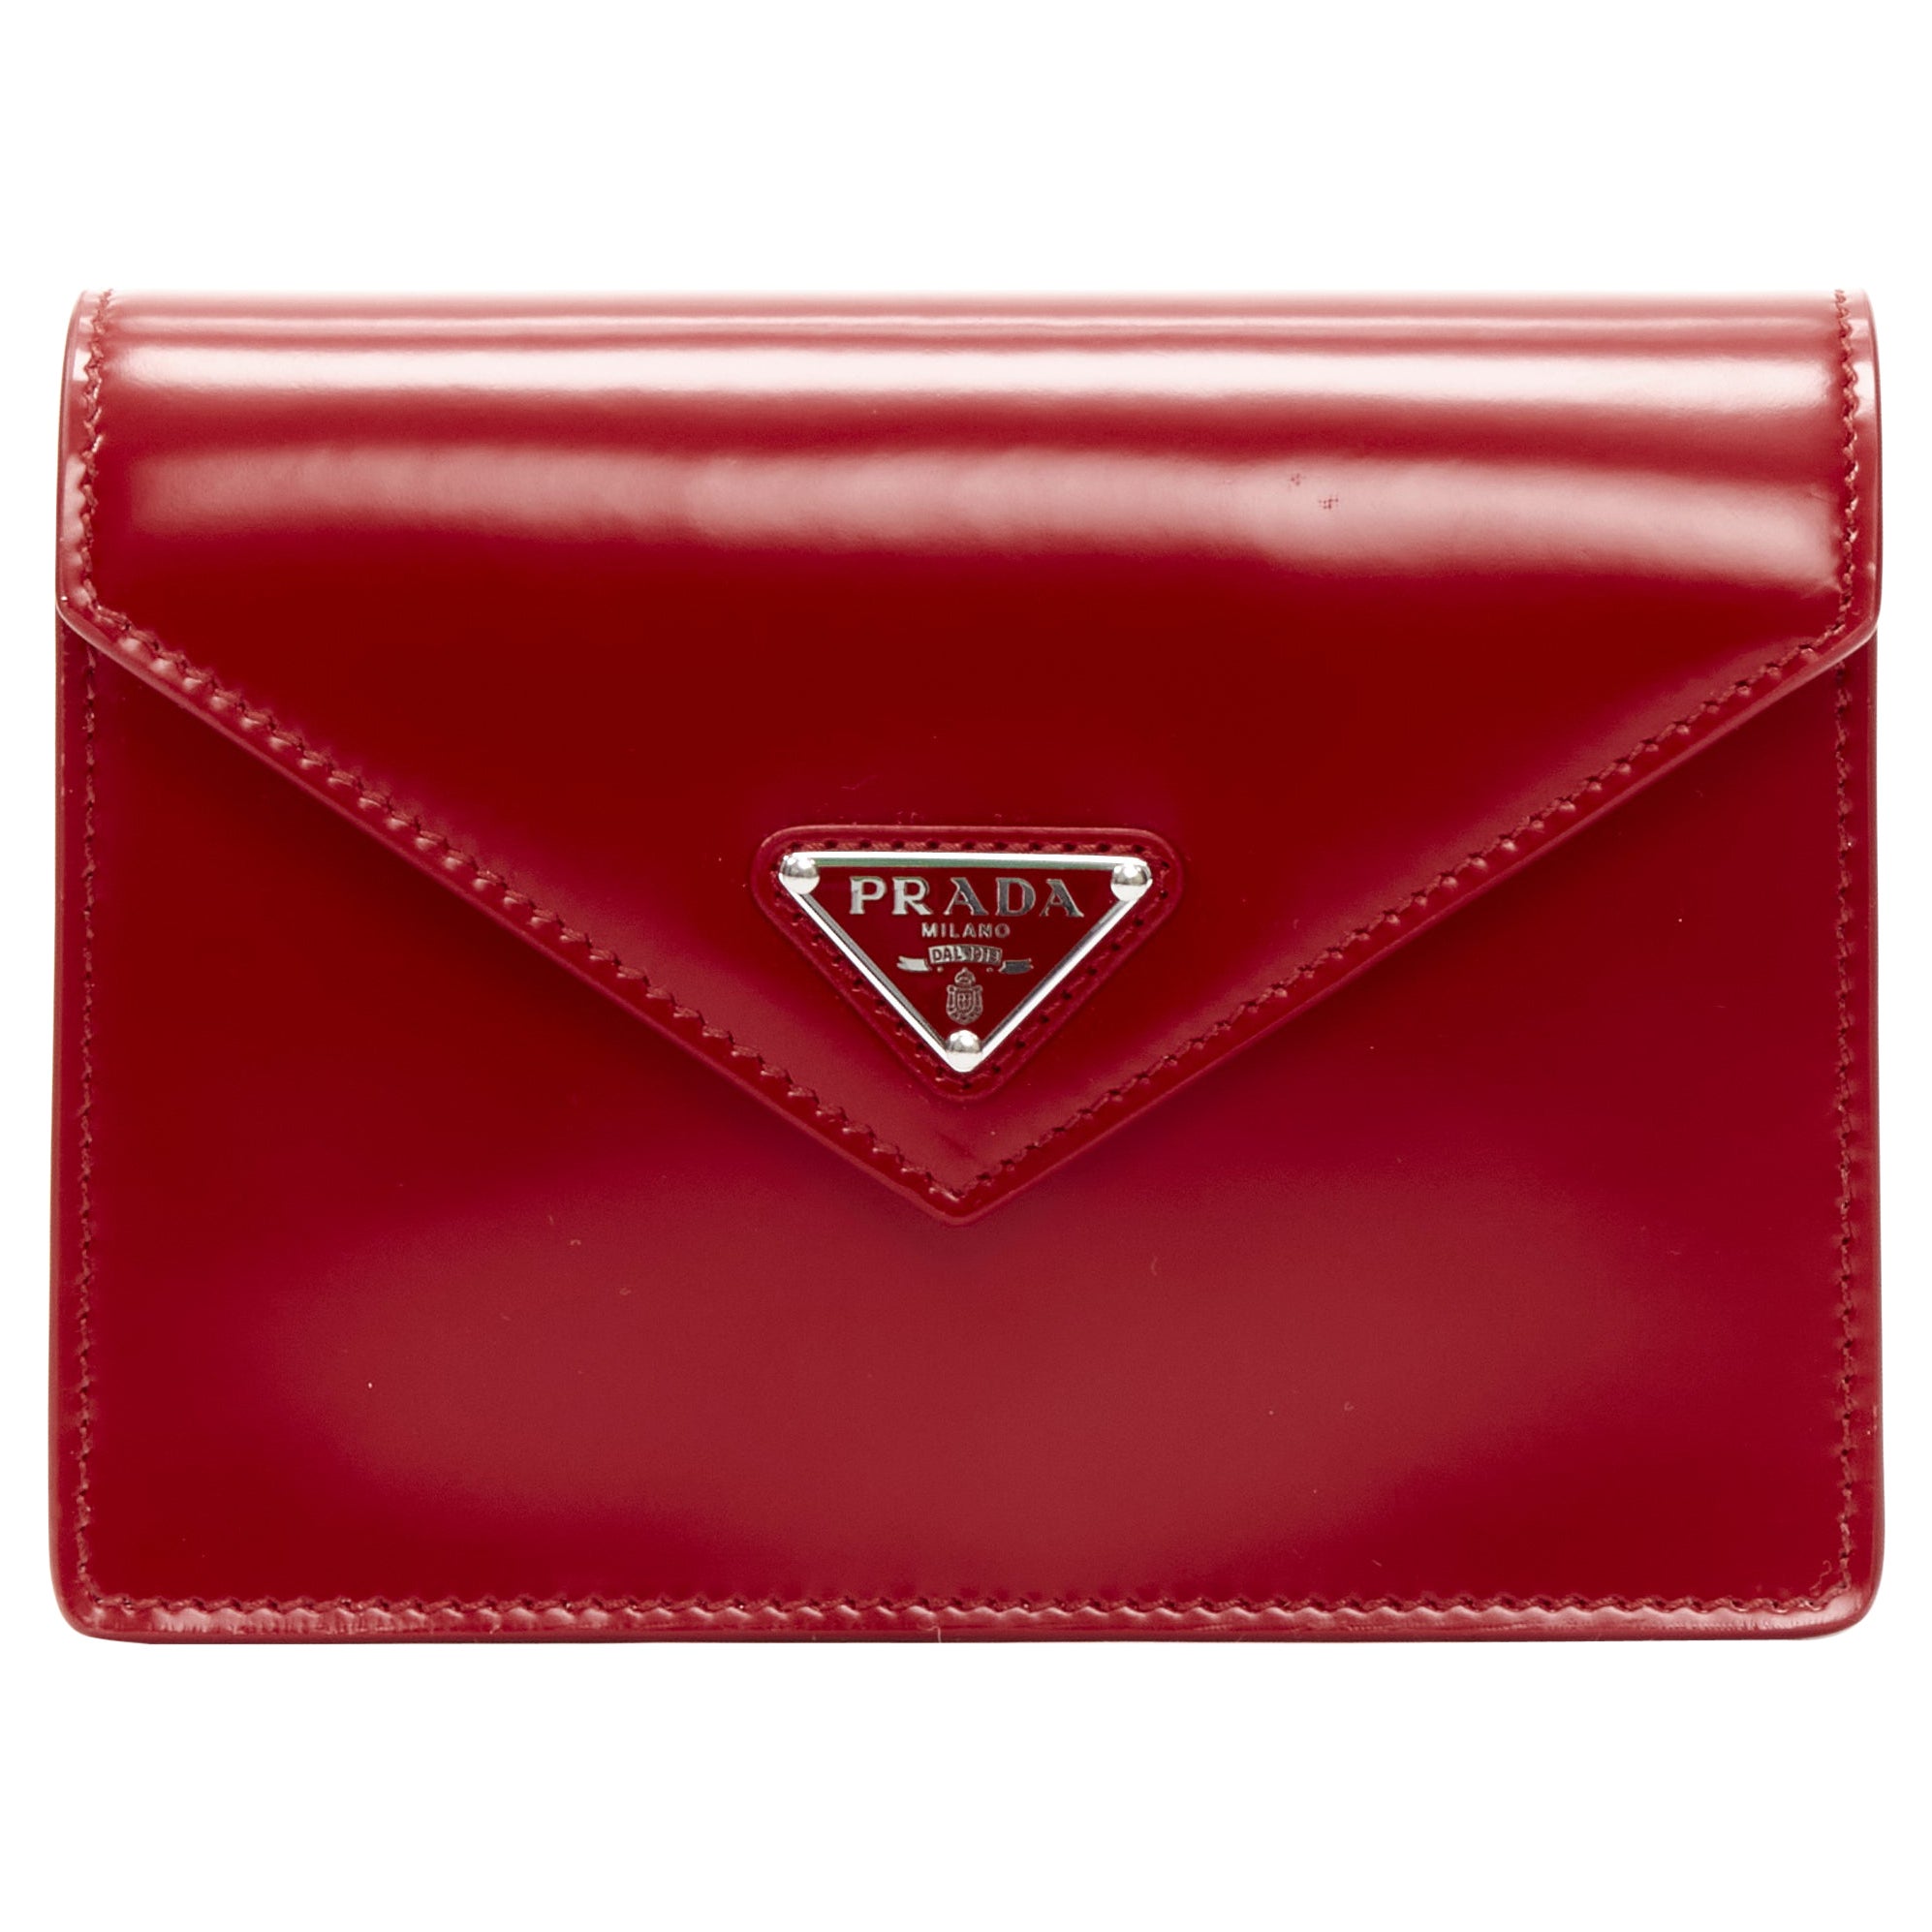 new PRADA 2021 2 pack playing cards red triangle logo envelop case pouch clutch